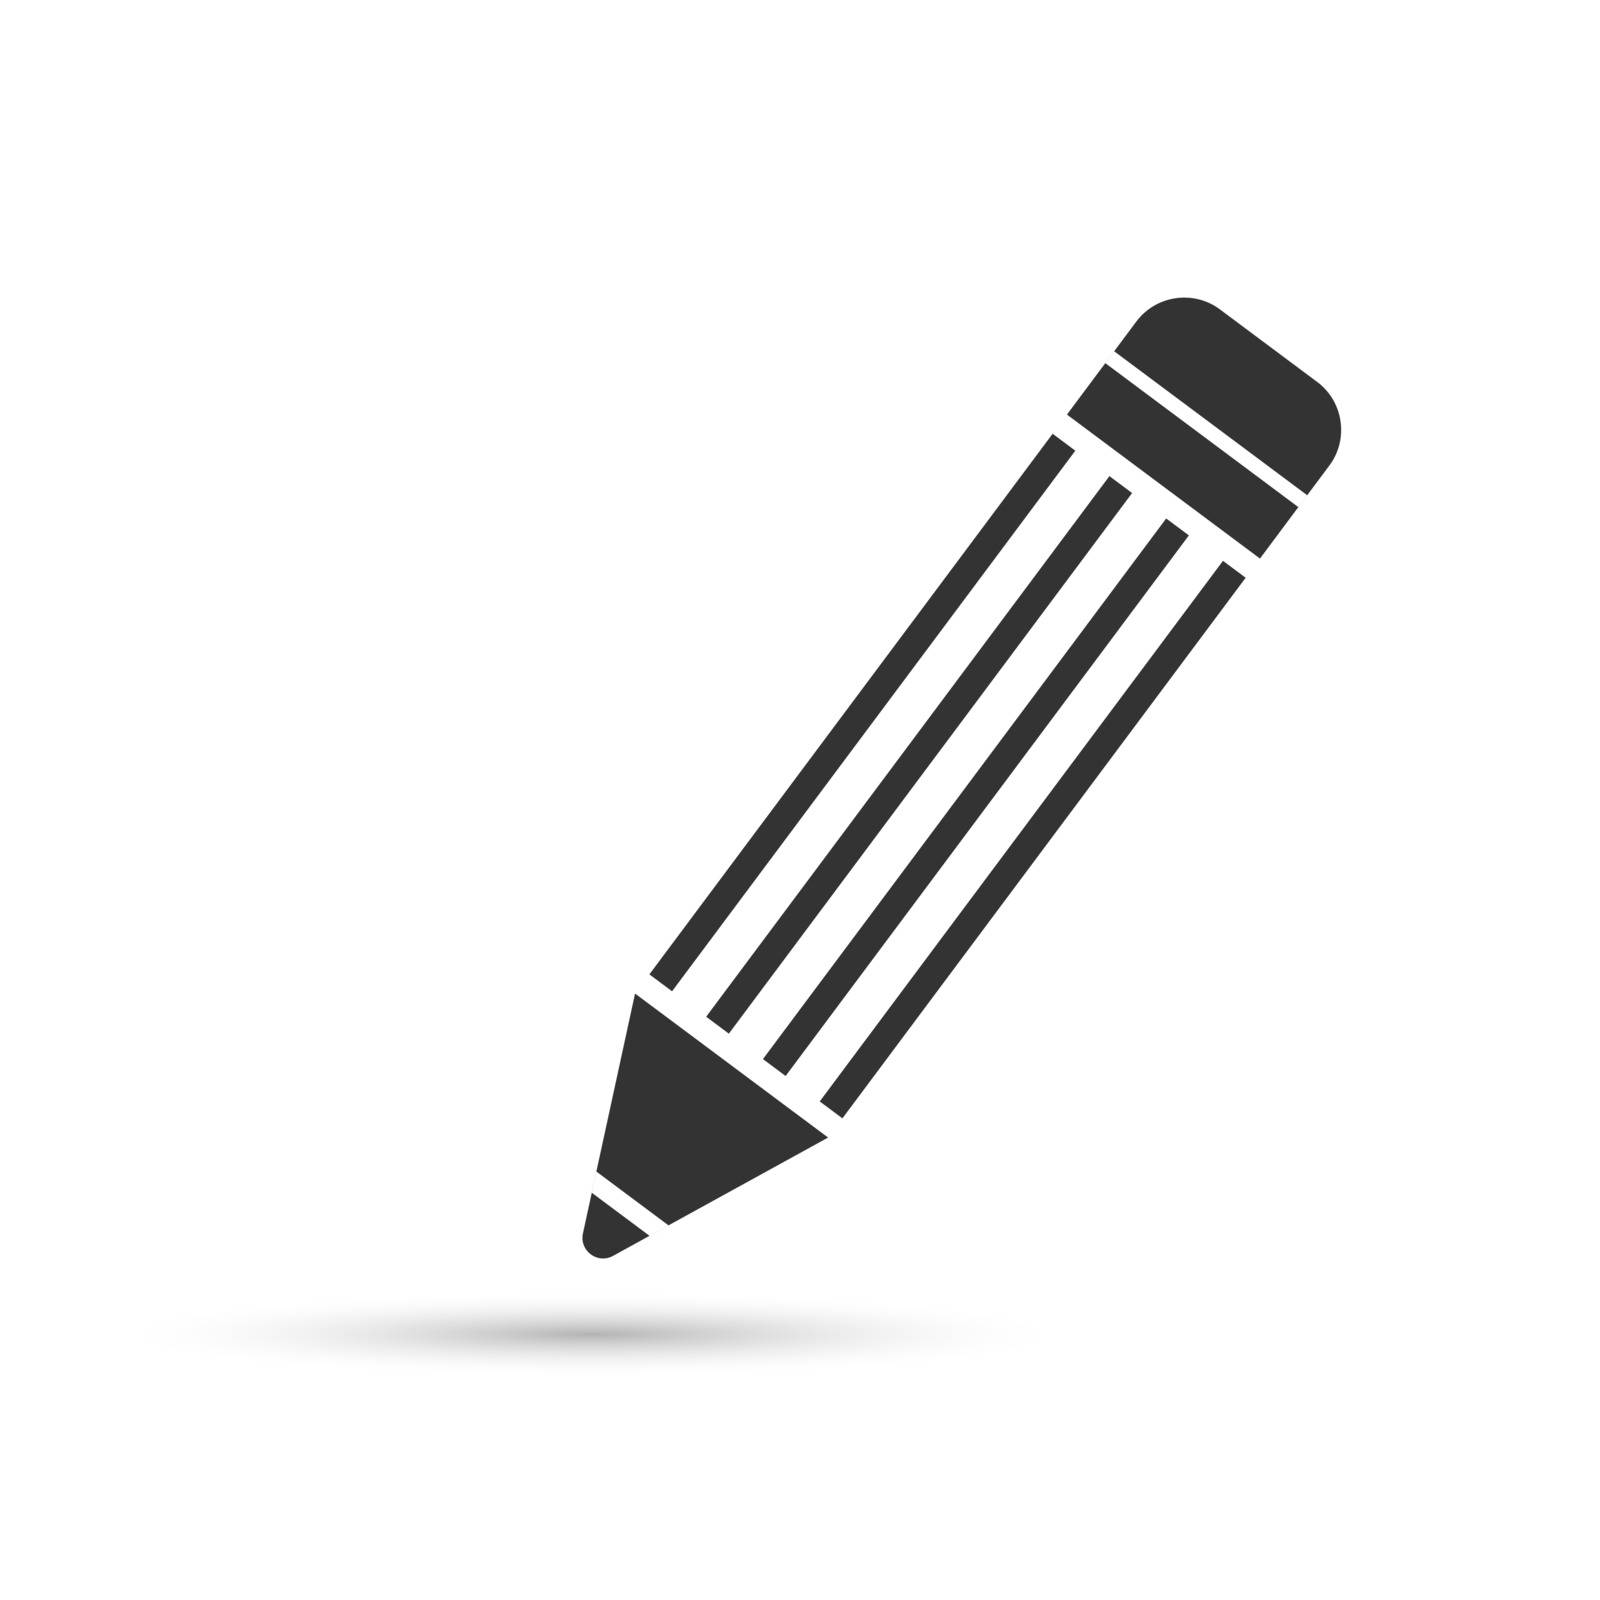 Icon of pencil with eraser. Simple flat design by Grommik